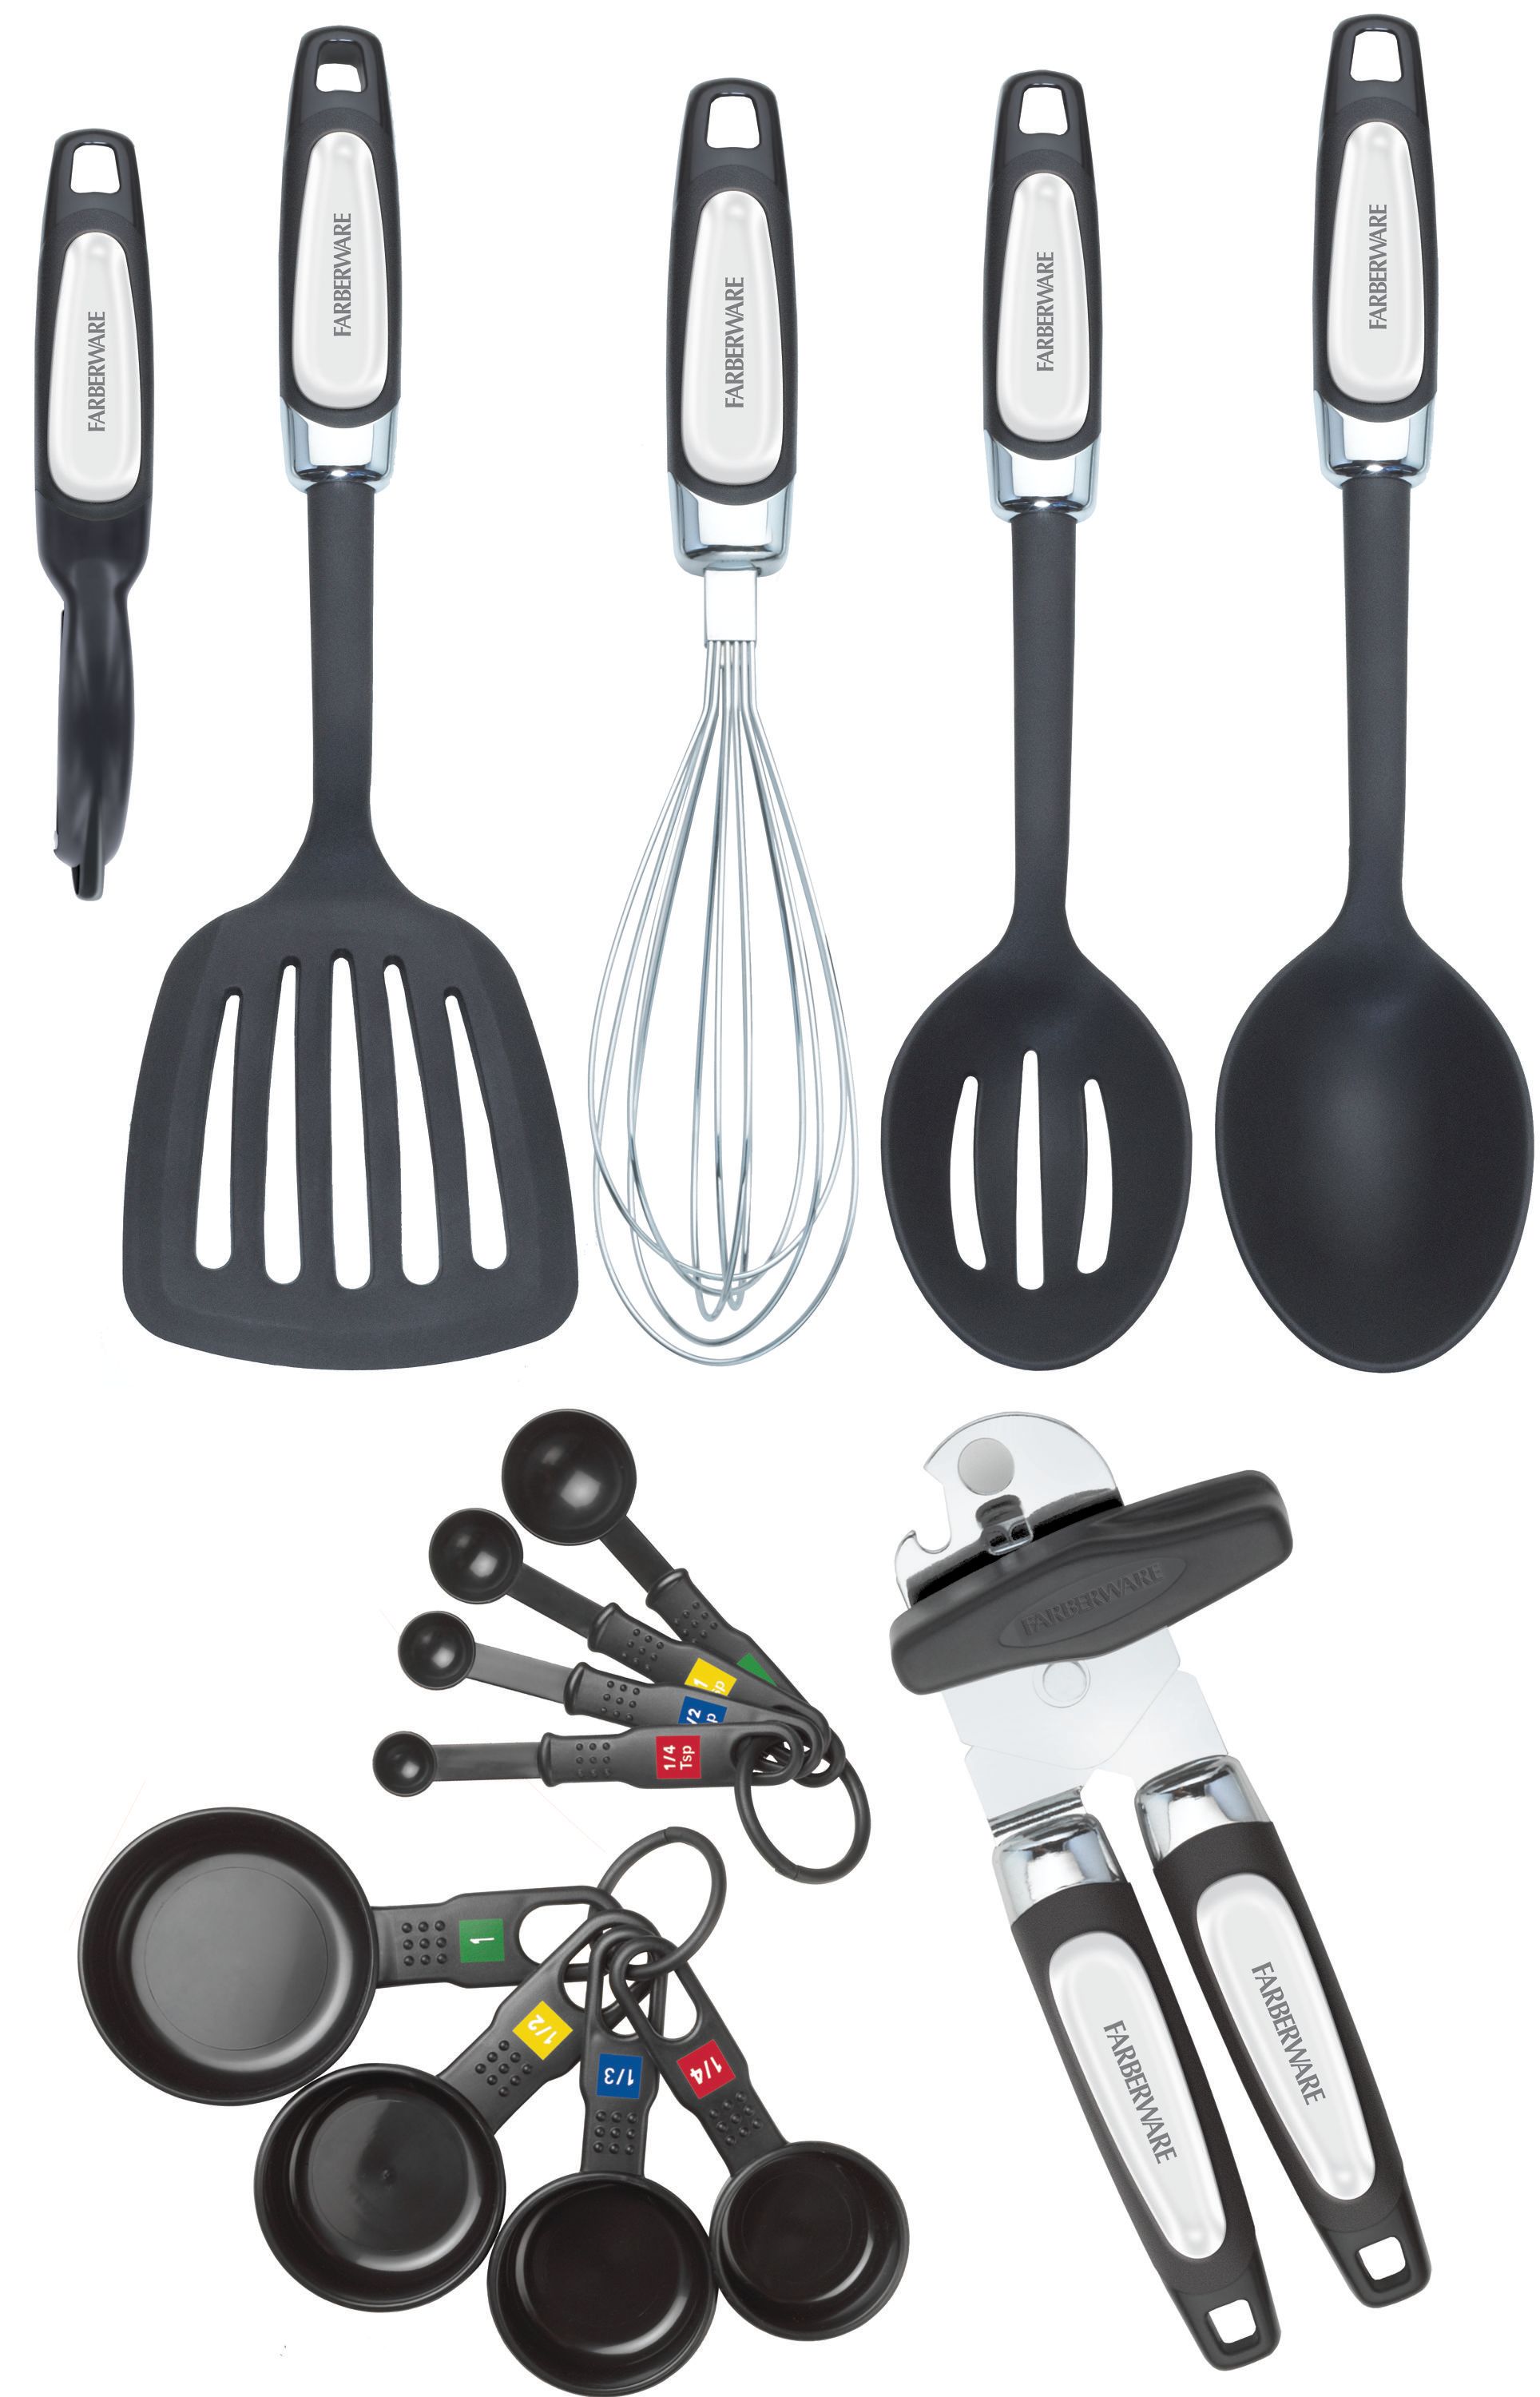 Farberware Professional 14-piece Kitchen Tool and Gadget Set in Black - image 1 of 19